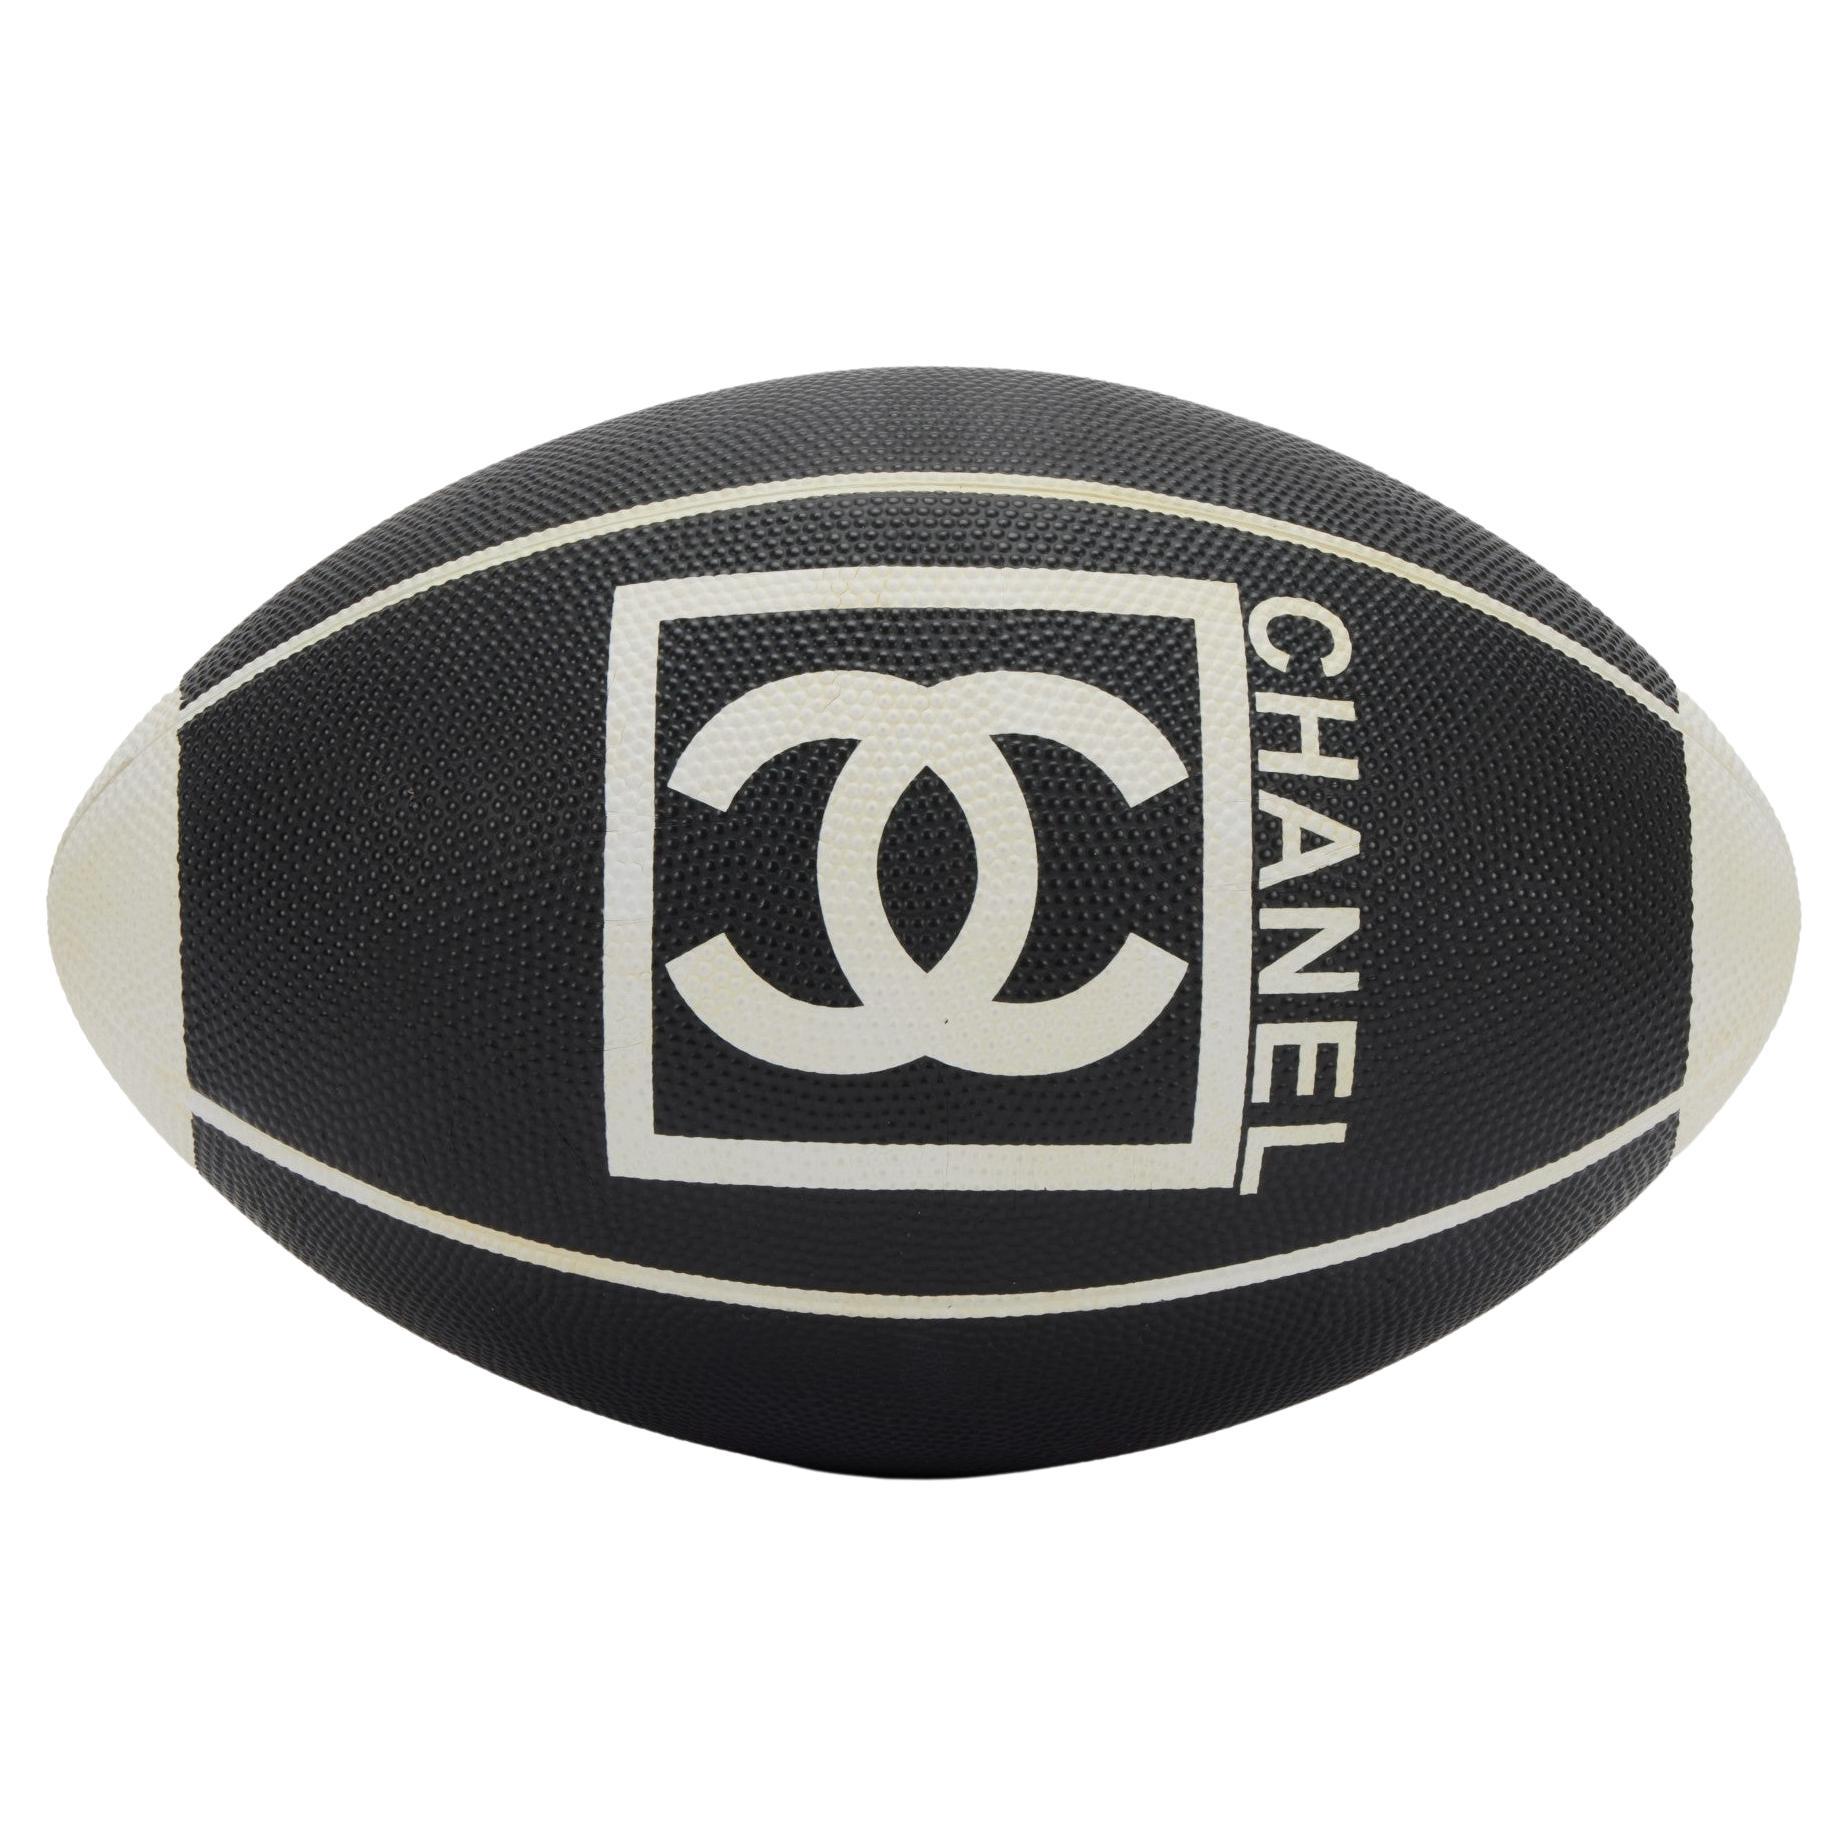 Chanel Rugby Football Ball For Sale